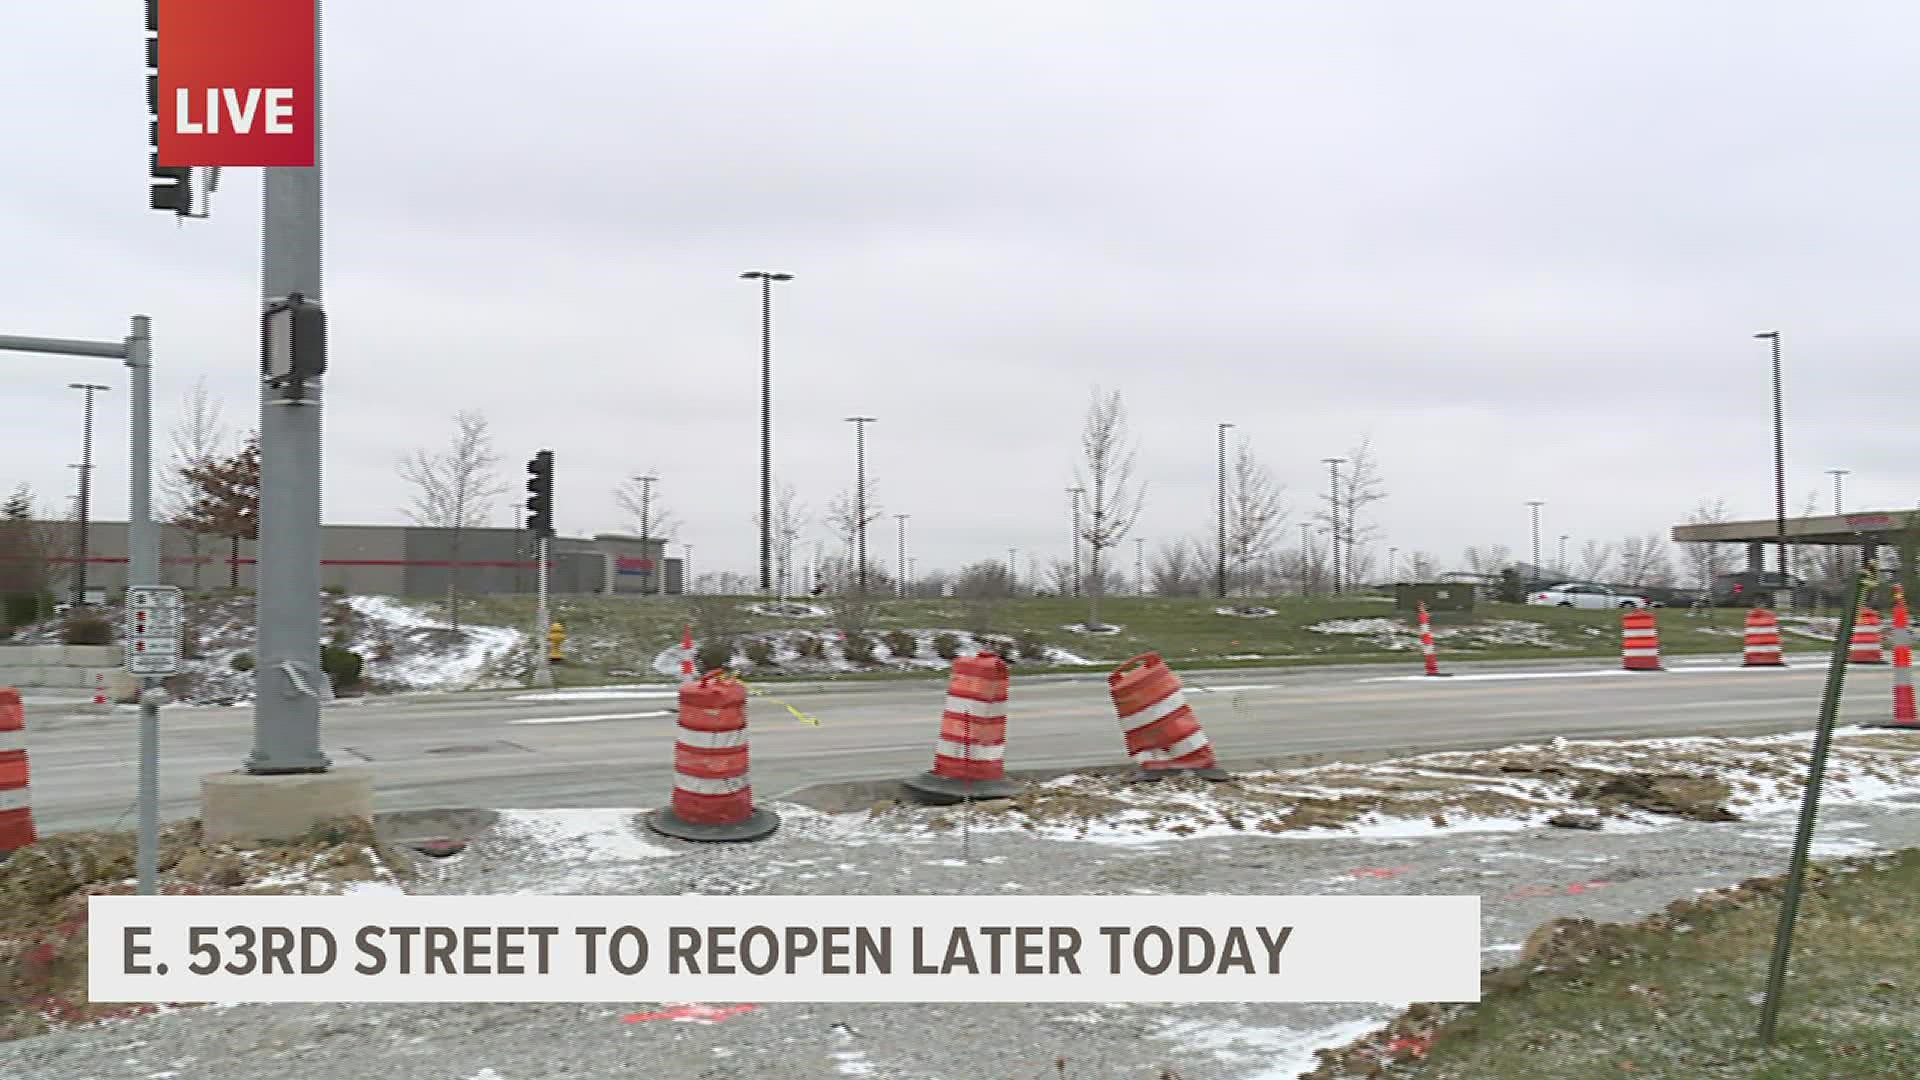 The Davenport Public Works Department said there will be some lane closures during the winter as crews work on a walking path.